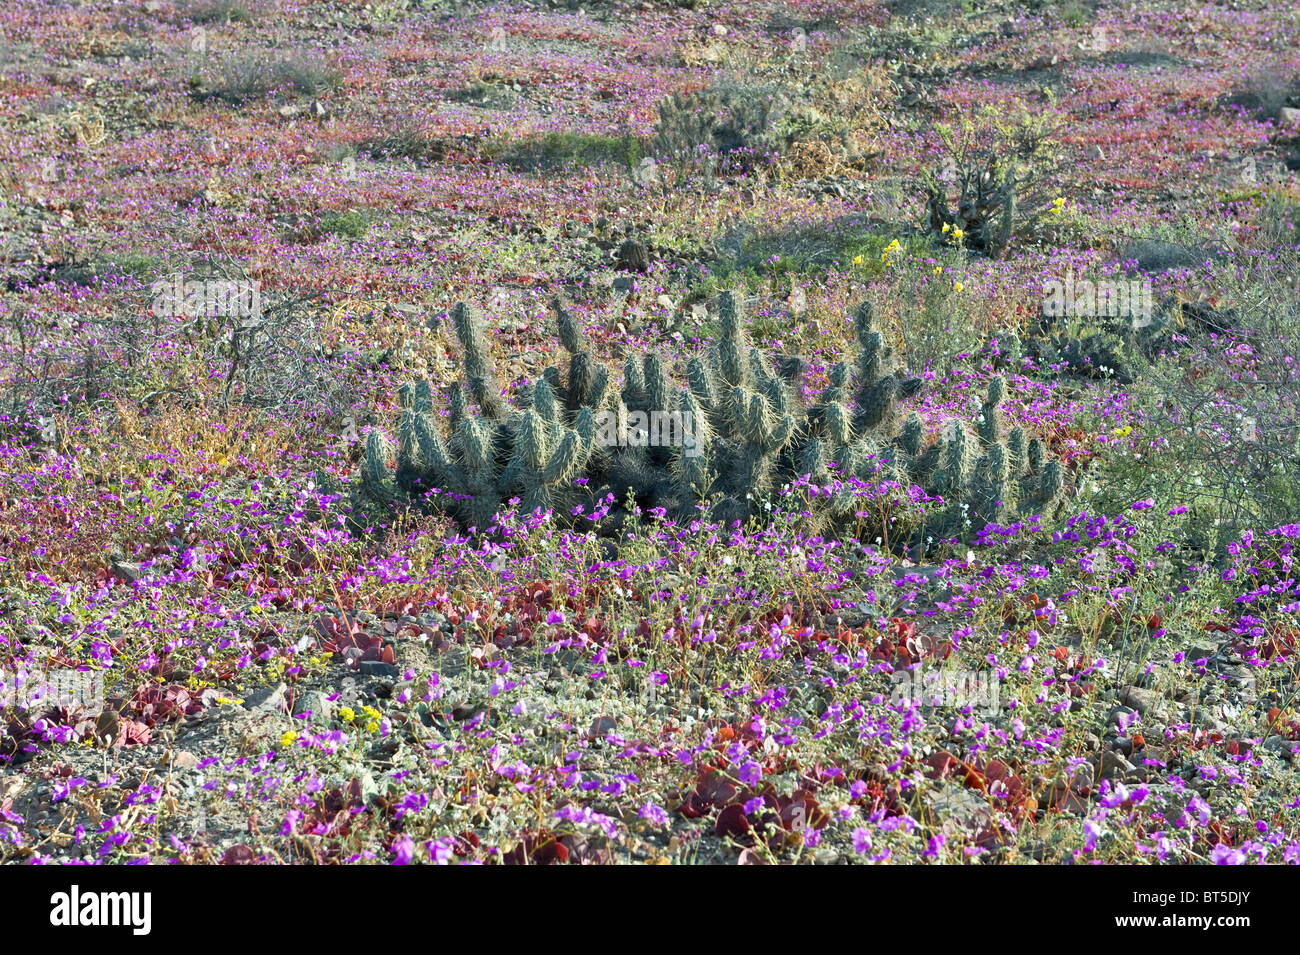 Cactus and plants in flower in month fallowing rainfall first in seven years Atacama South of Caldera Chile South America Stock Photo